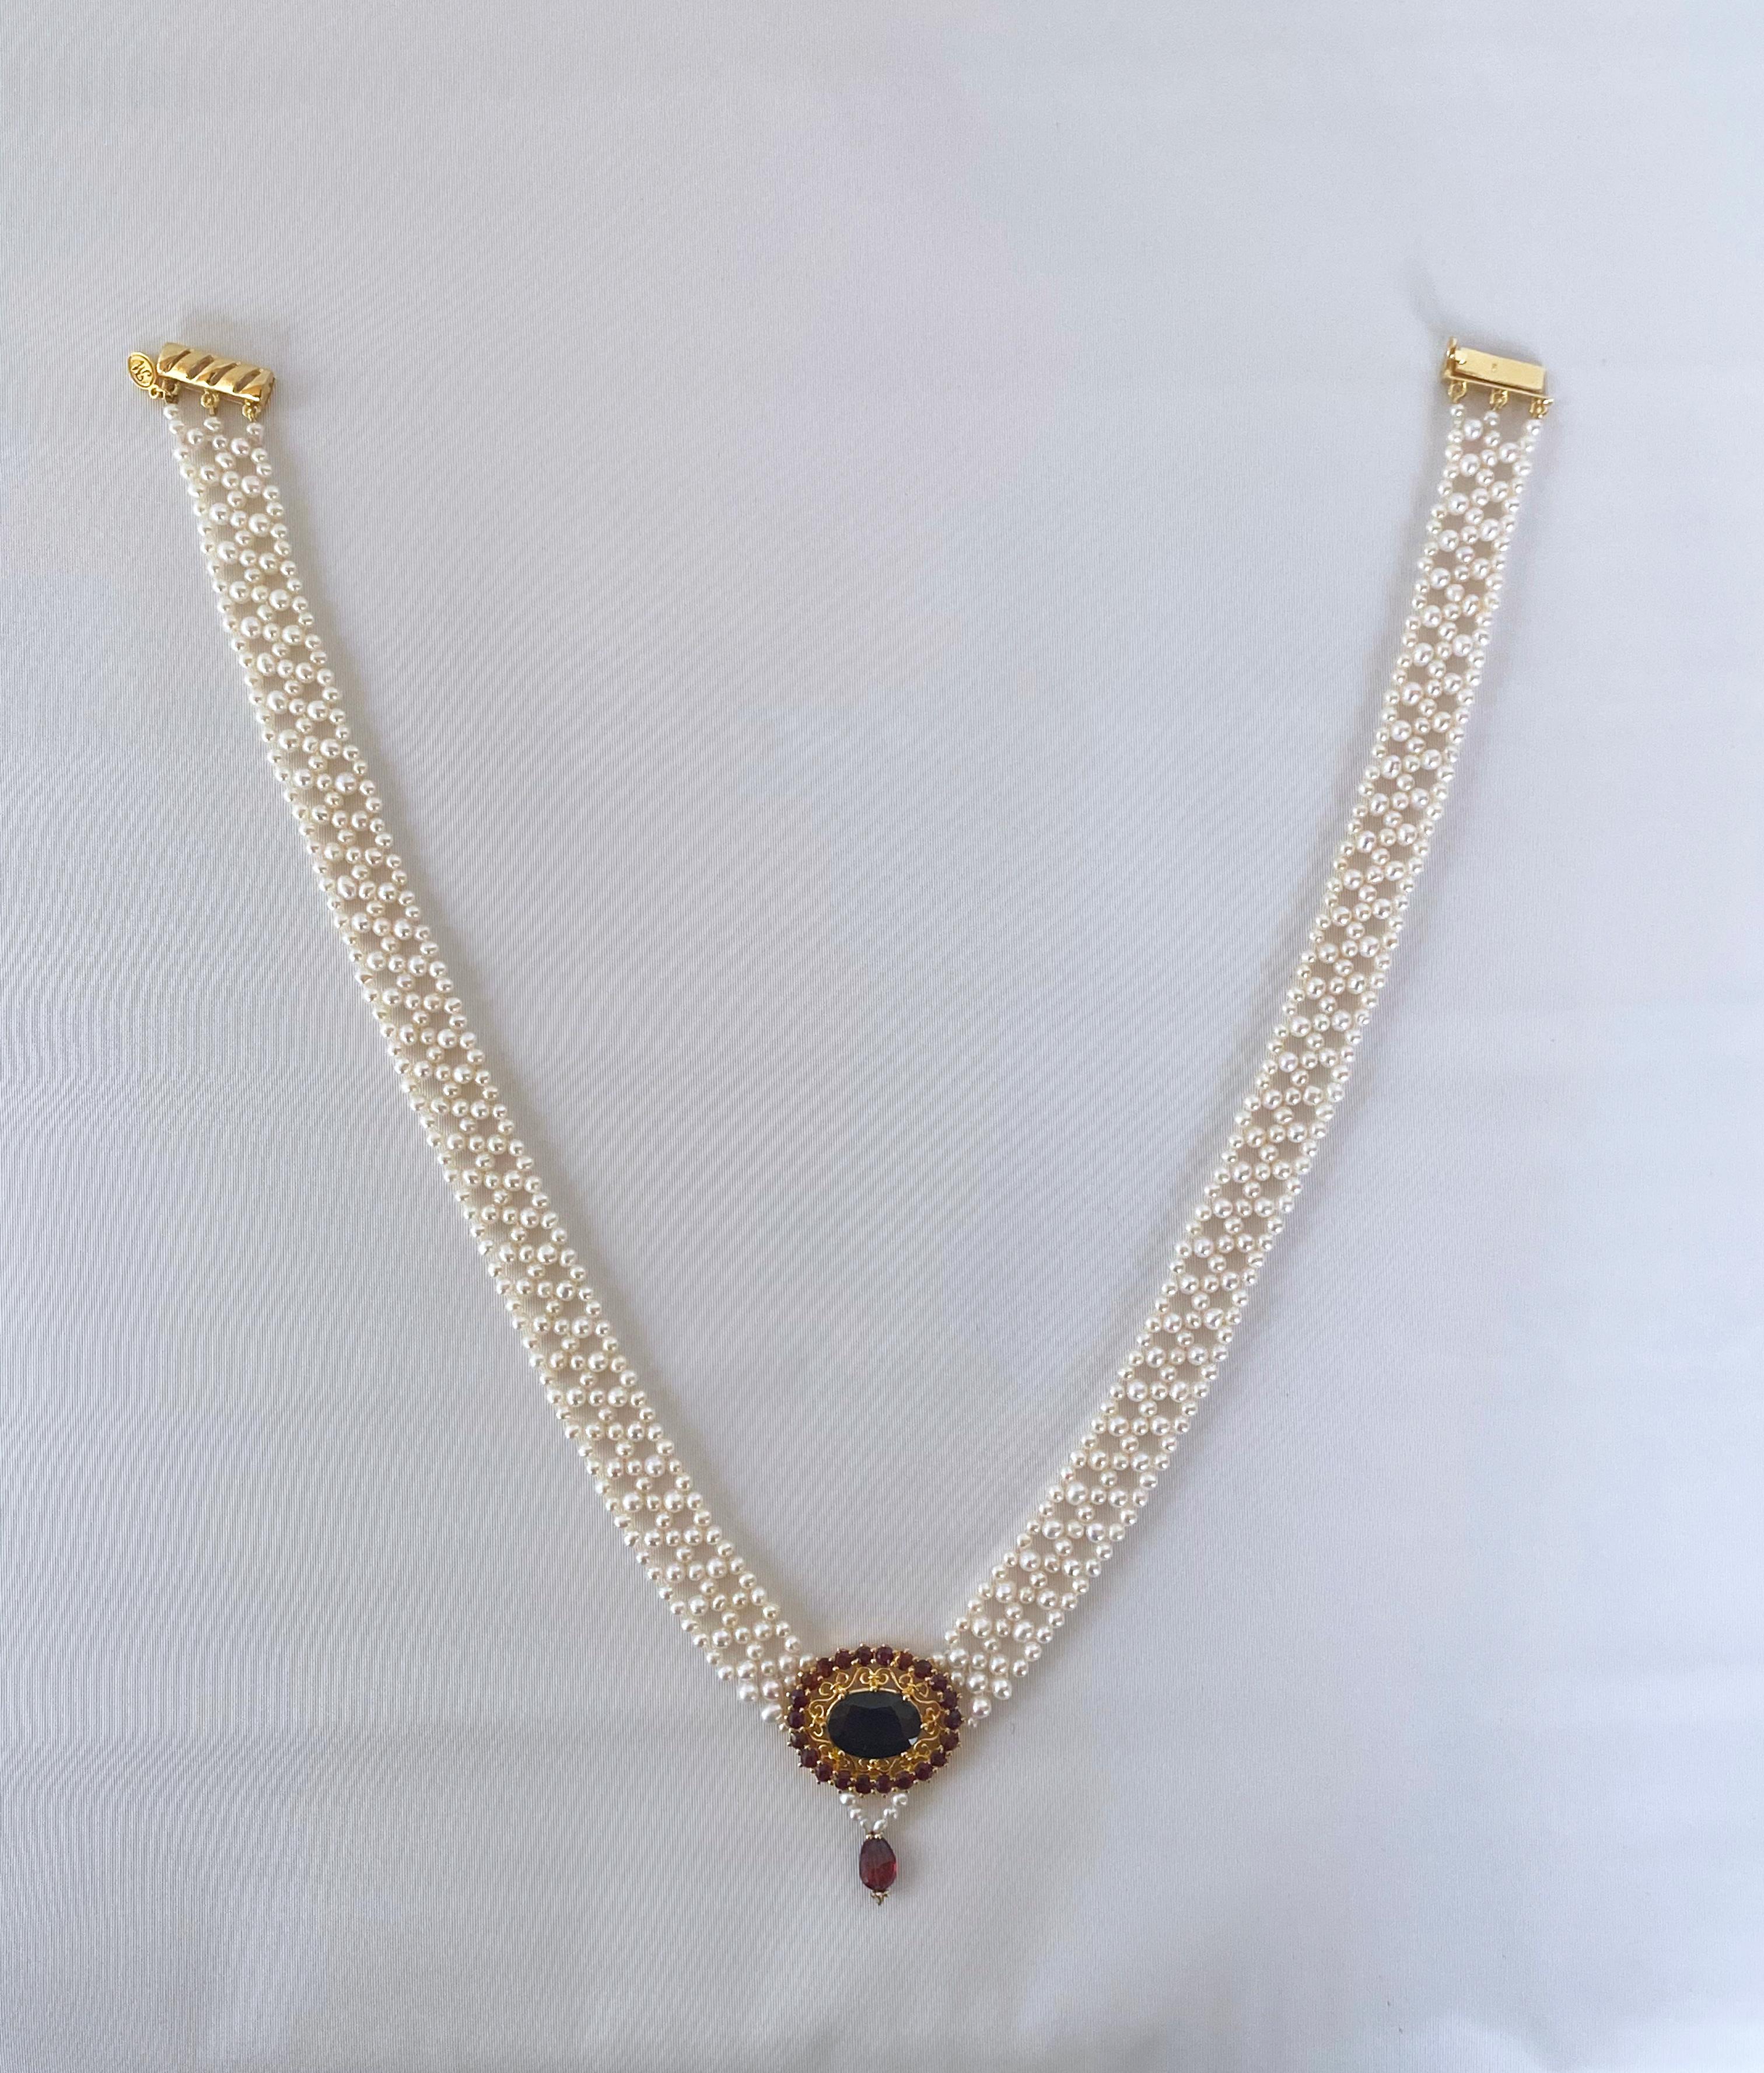 Marina J. Pearl Woven Necklace with Gold Plated Vintage Garnet Brooch 2